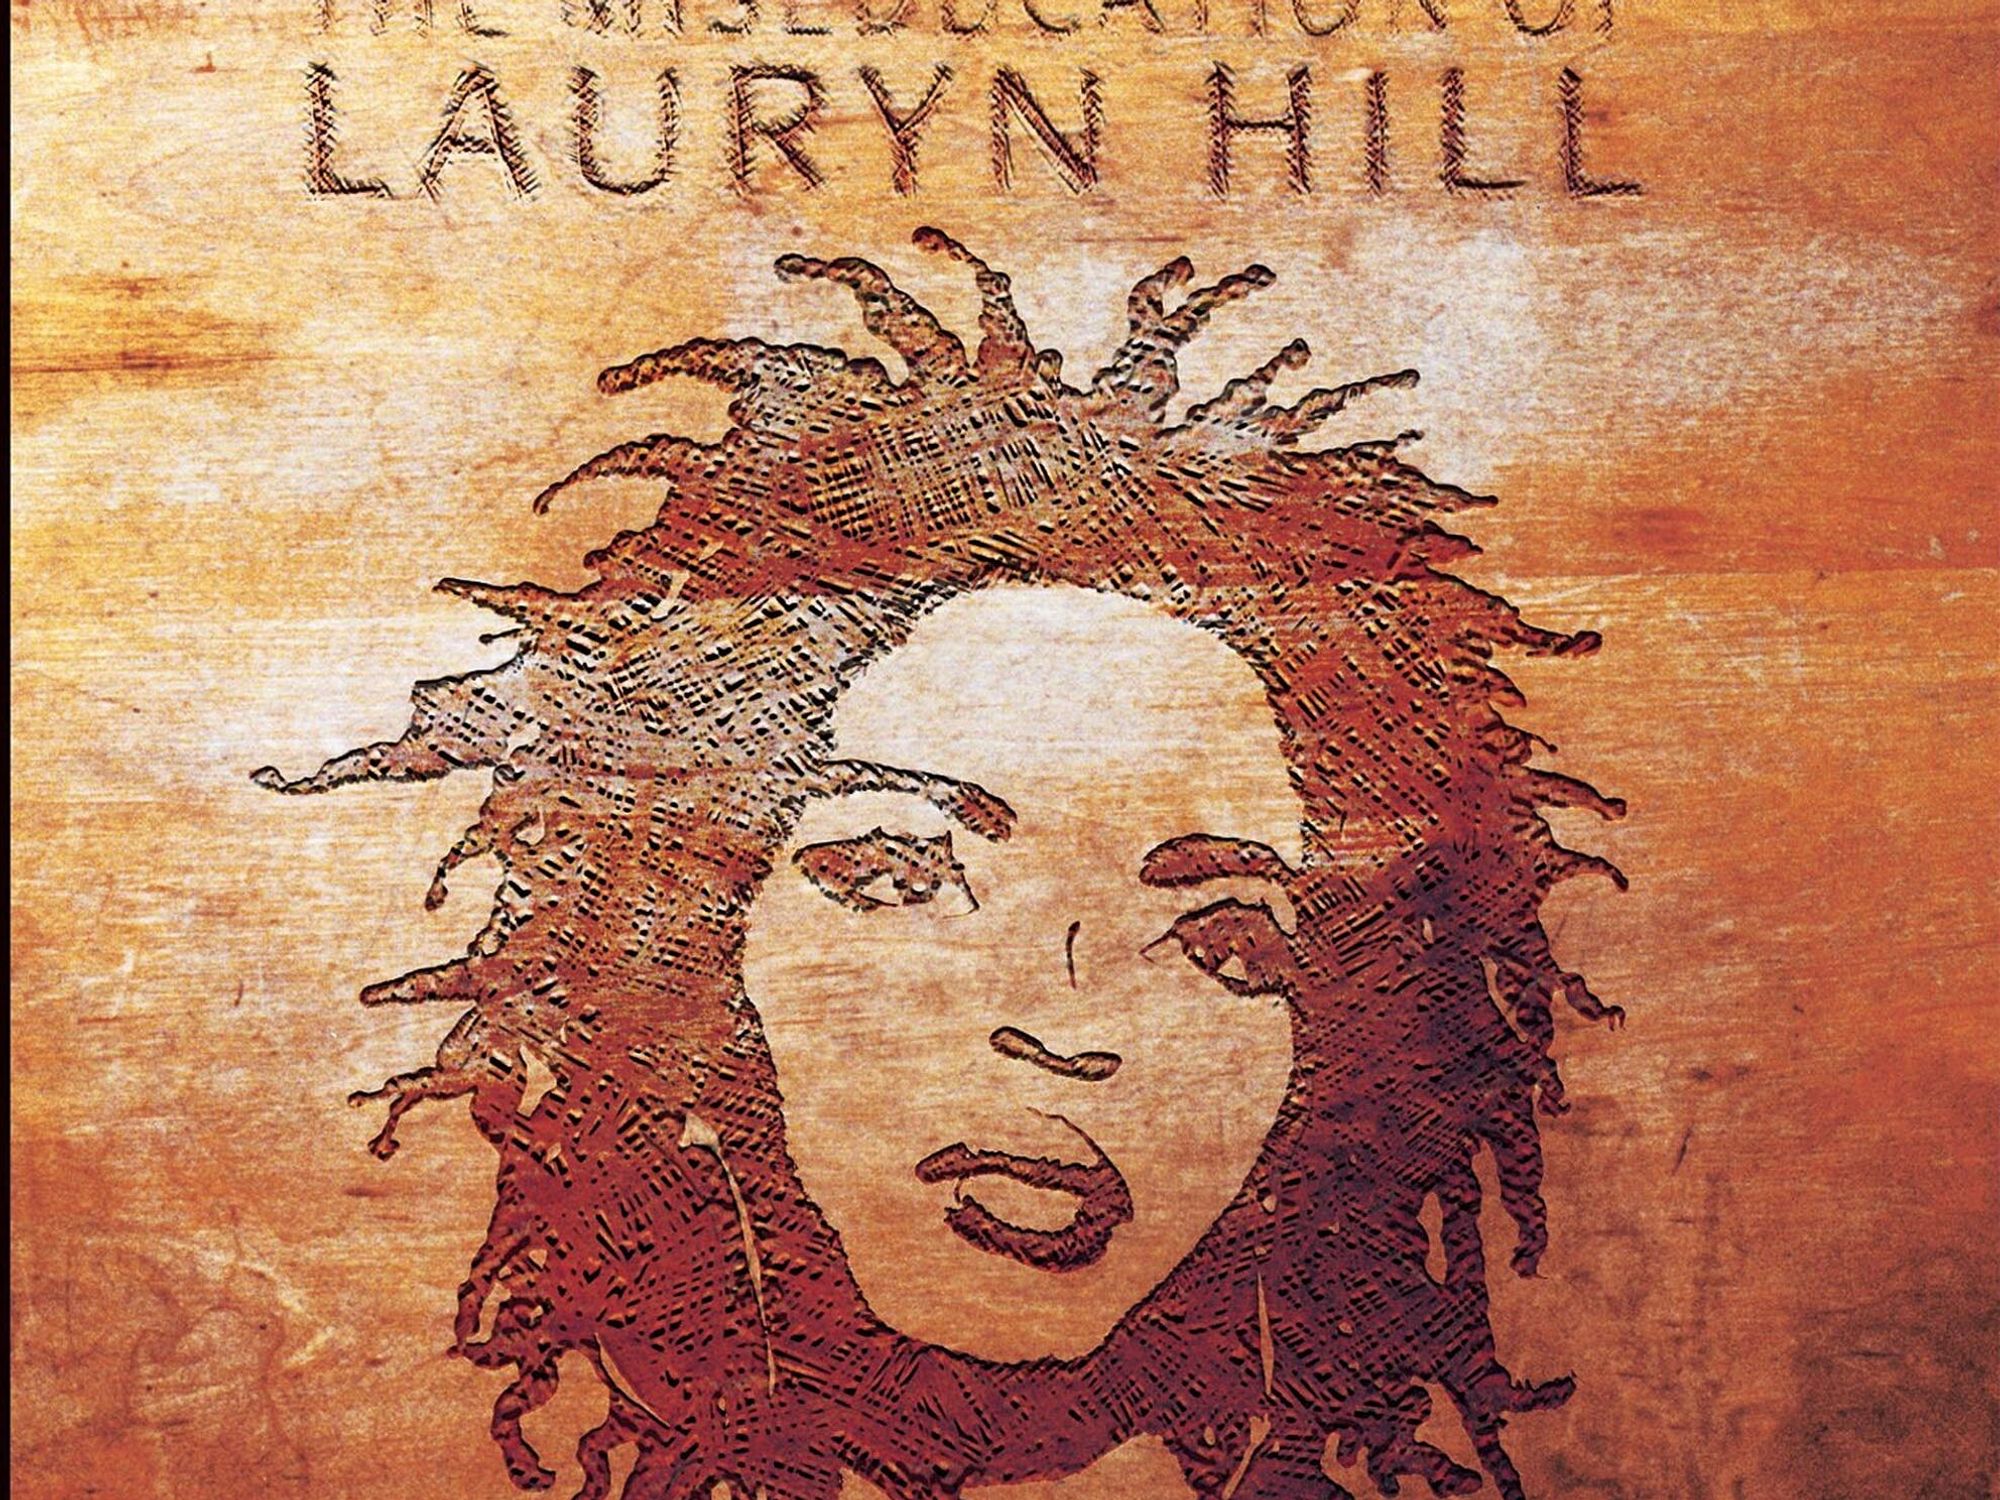 https://www.okayplayer.com/media-library/released-on-august-25-1998-the-miseducation-of-lauryn-hill-is-its-own-case-study-on-the-power-and-profitability-of-diversity-a.jpg?id=33157692&width=2000&height=1500&coordinates=0%2C248%2C0%2C248